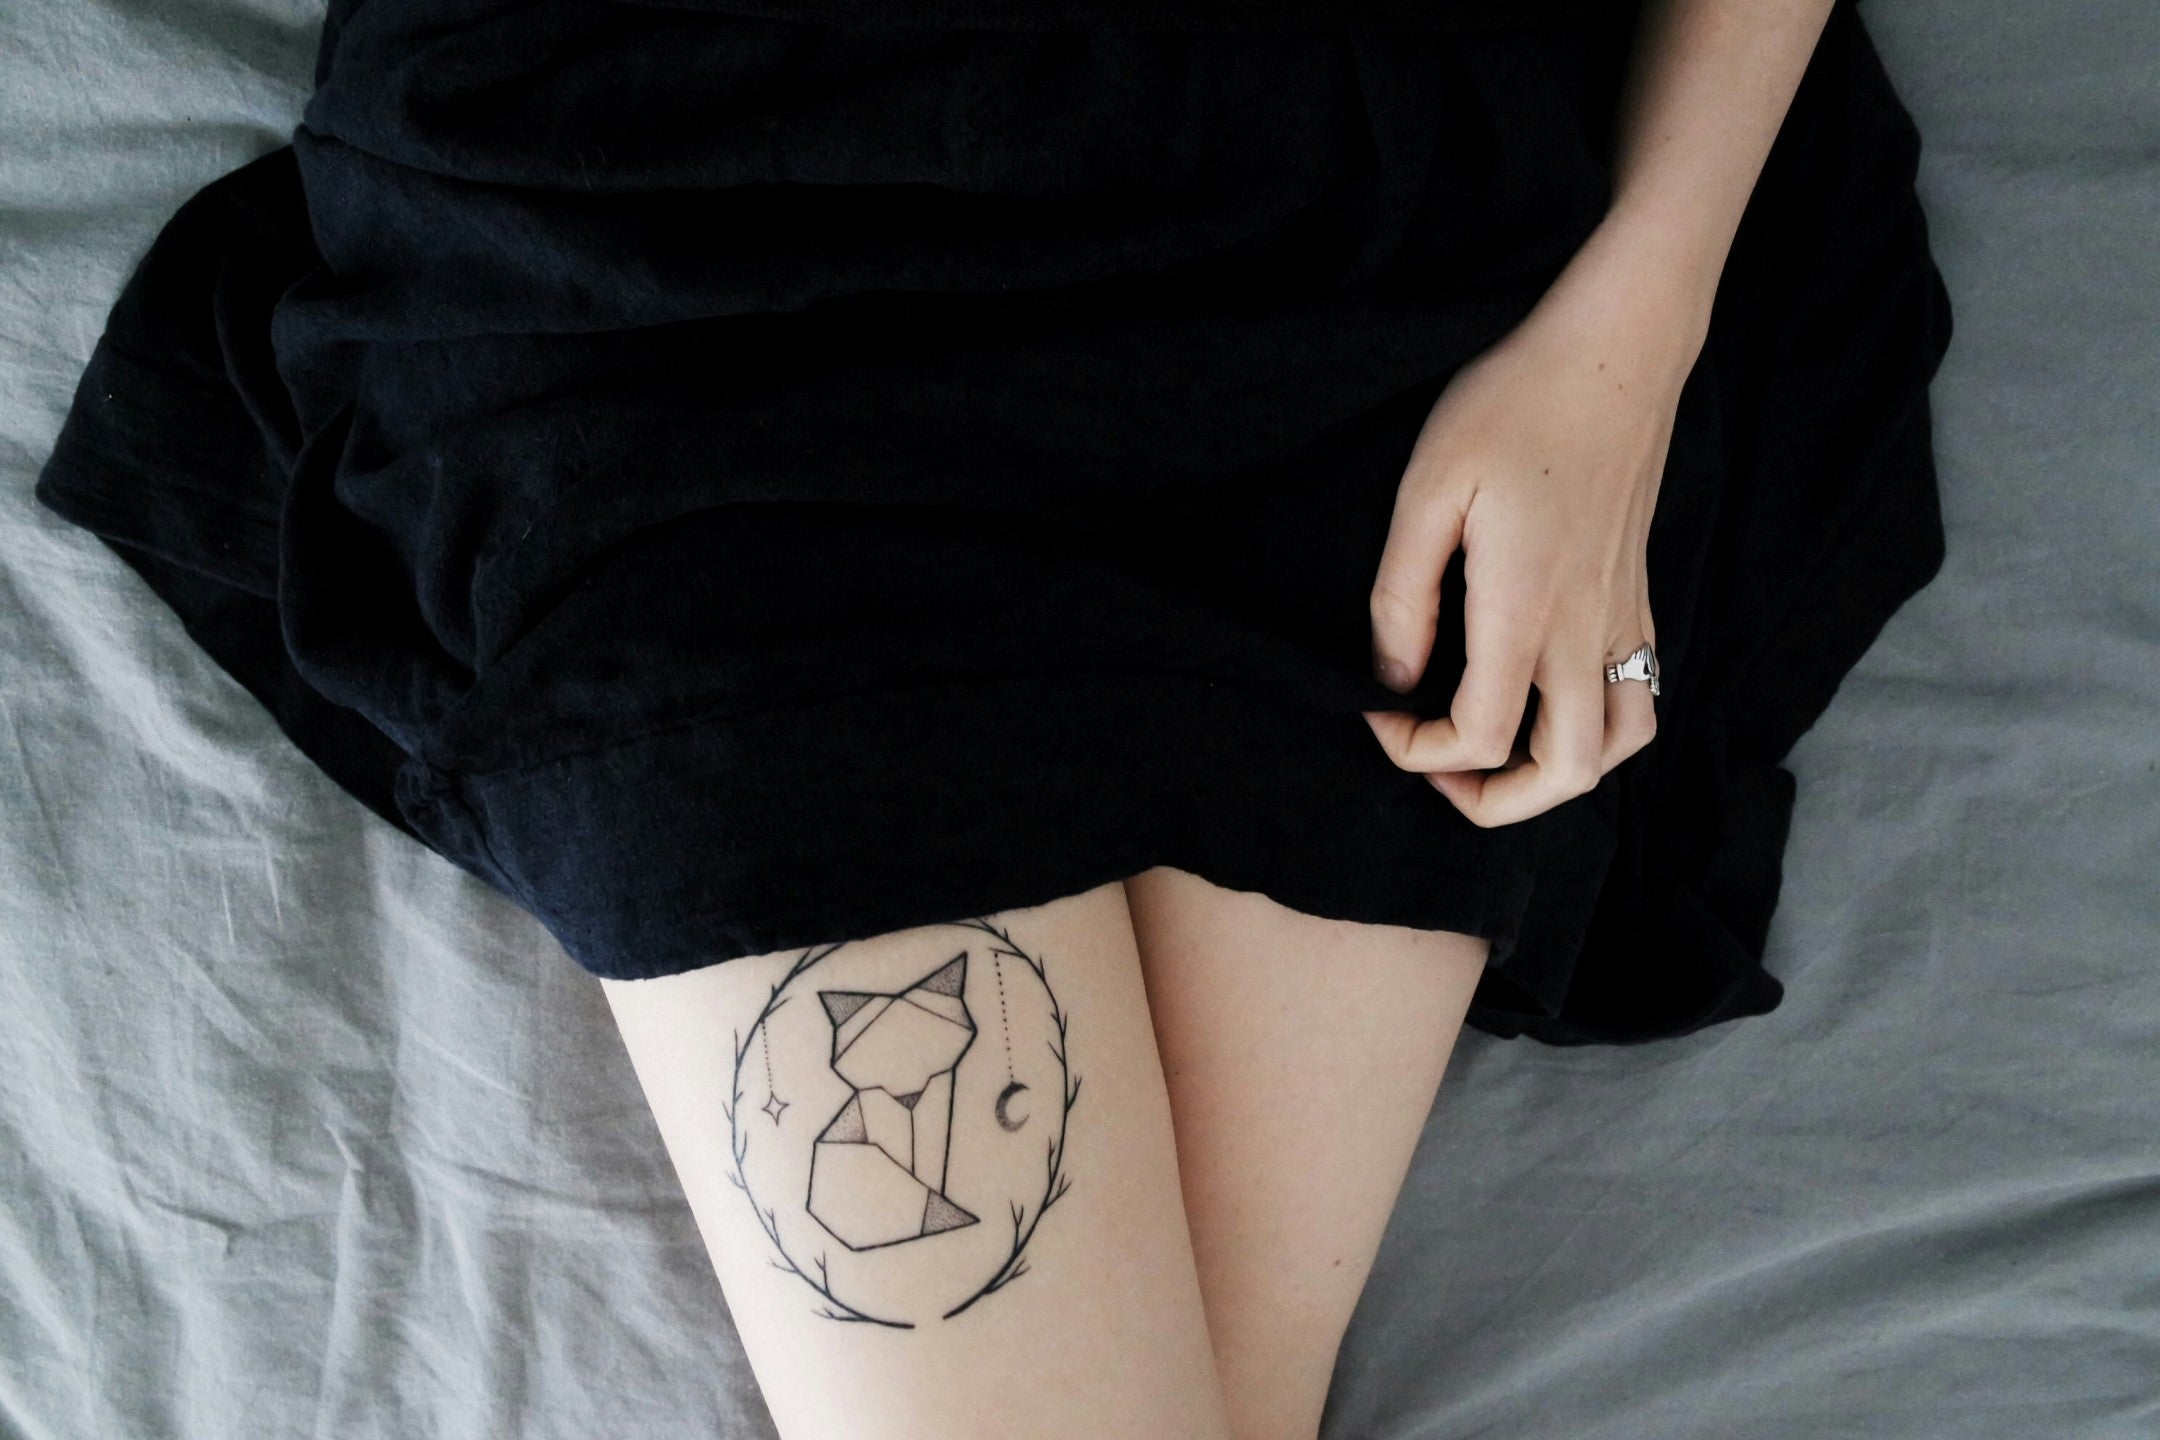 Person lying with a geometric tattoo on their thigh, indicative that IPL hair removal should not be used on tattoos.